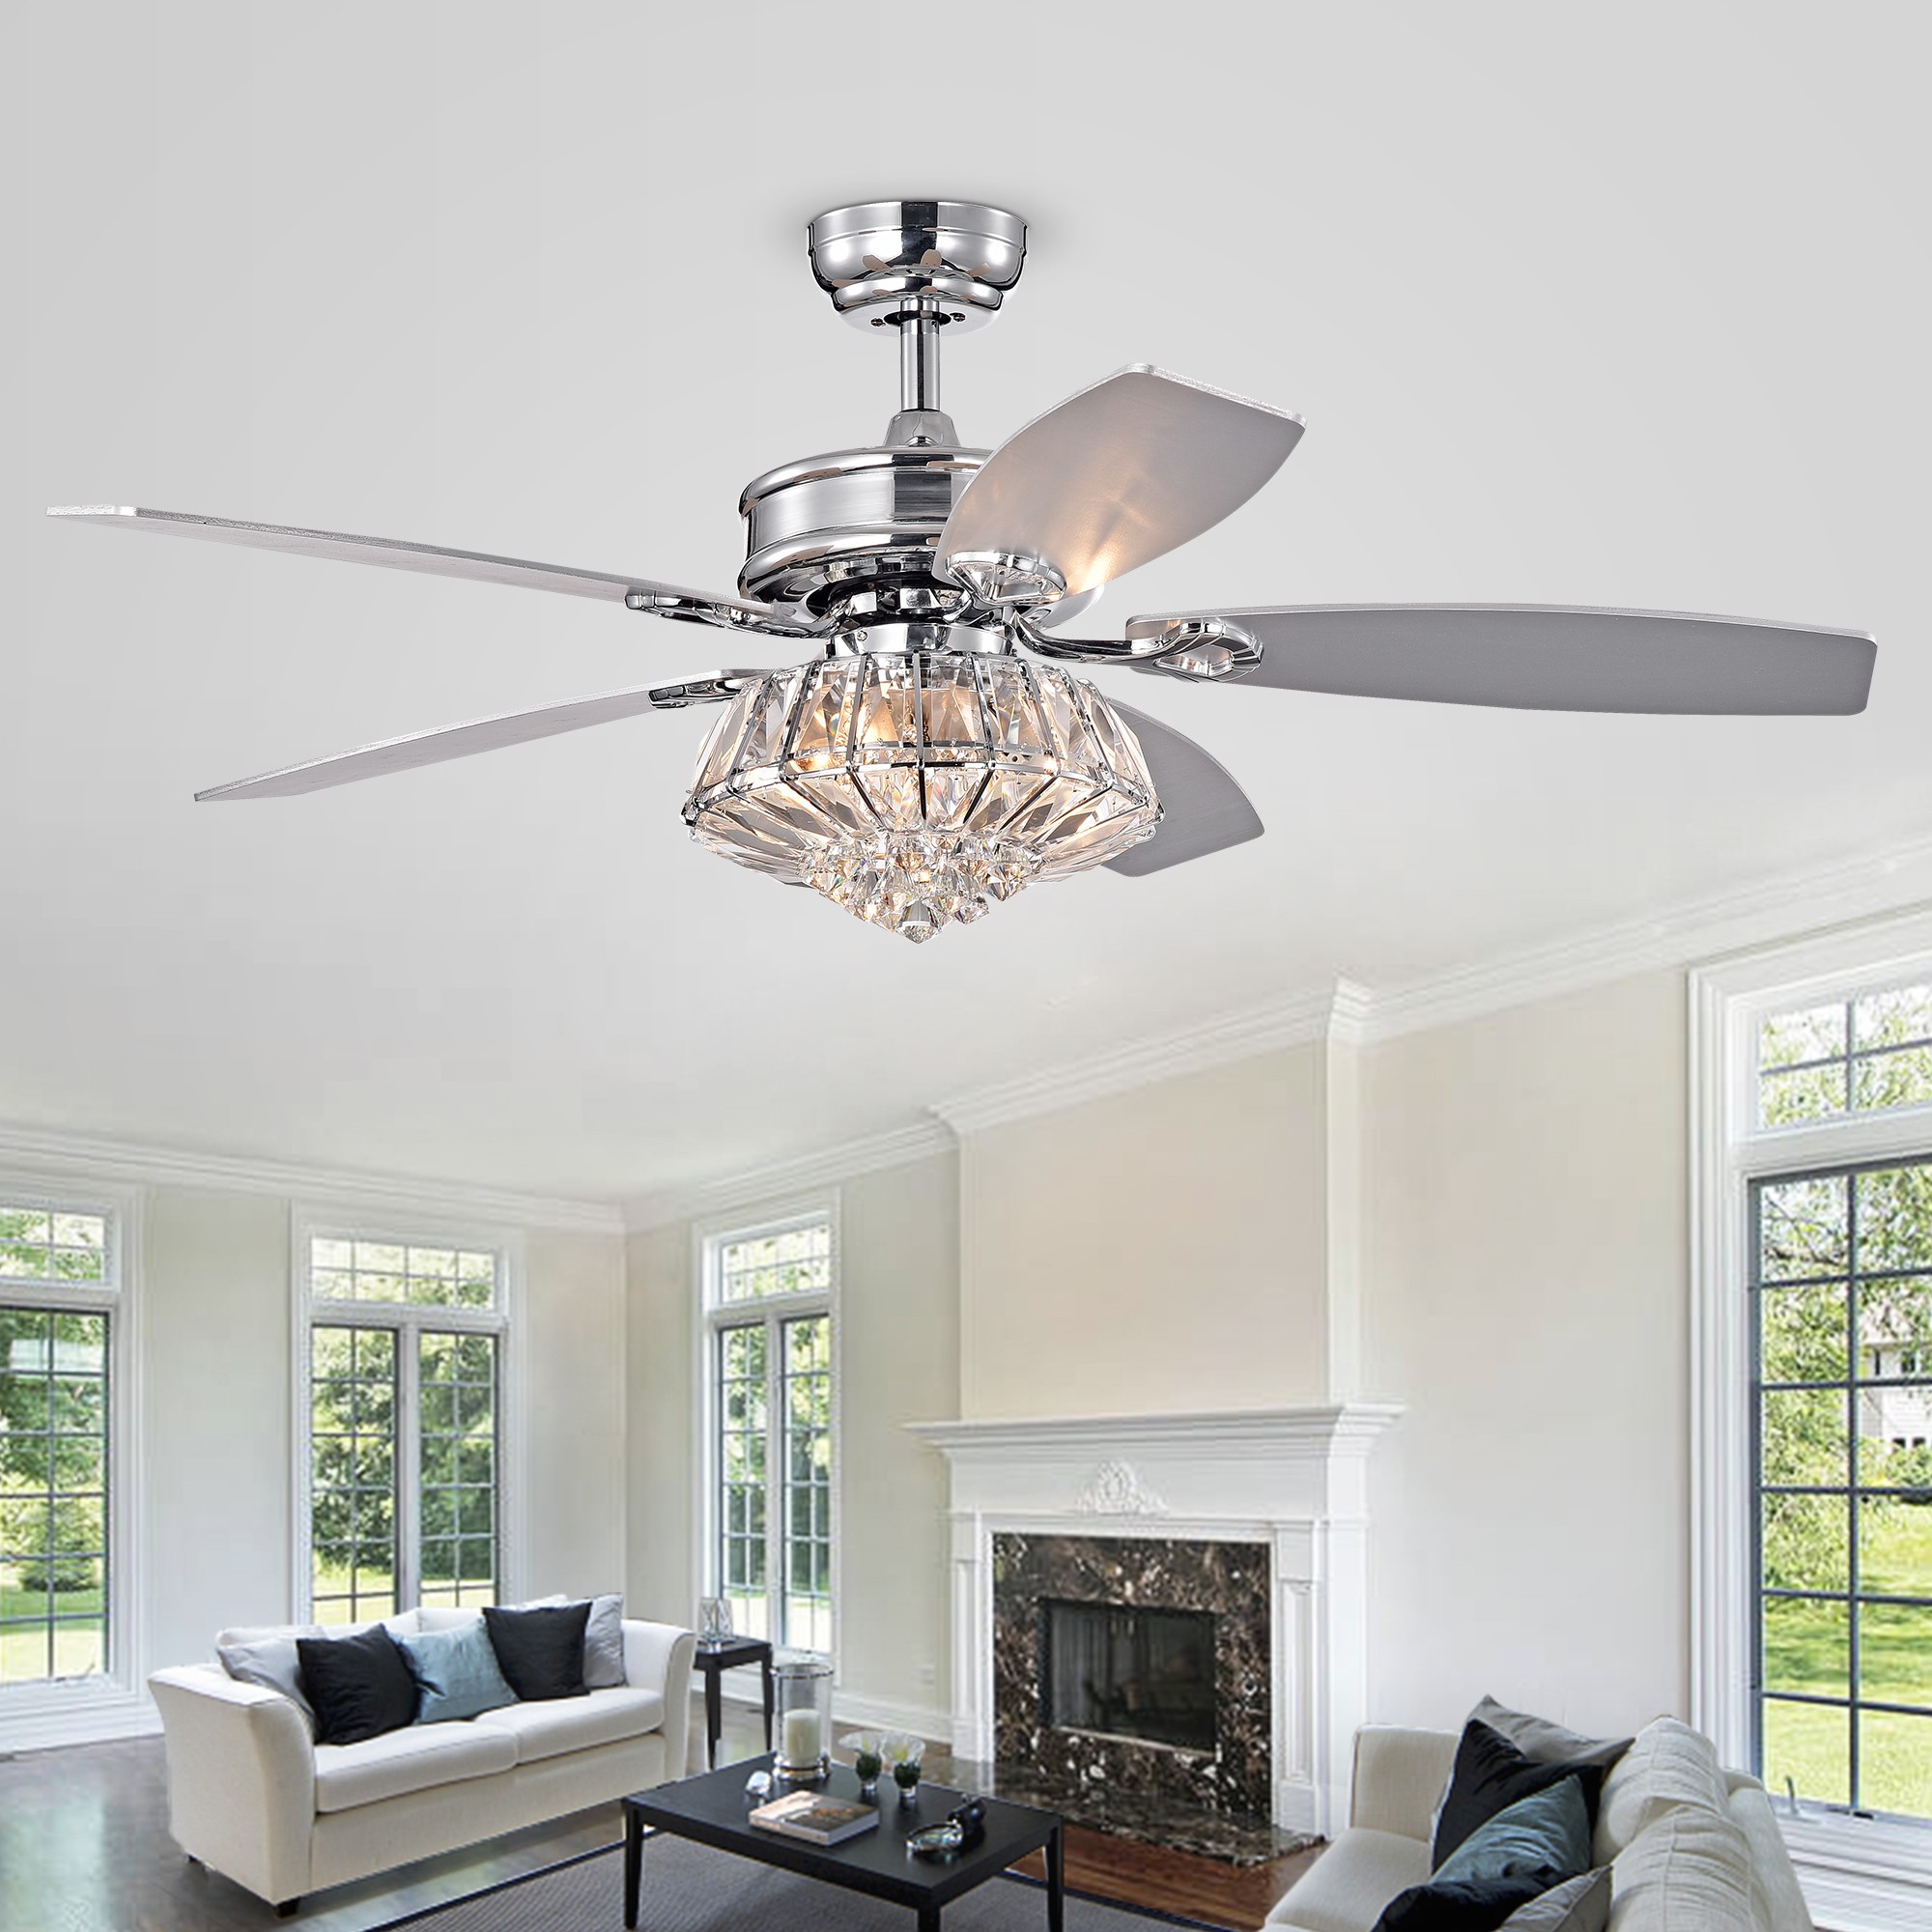 48" Steadman Reversible 5 Blade Ceiling Fan with Remote, Light Kit Included